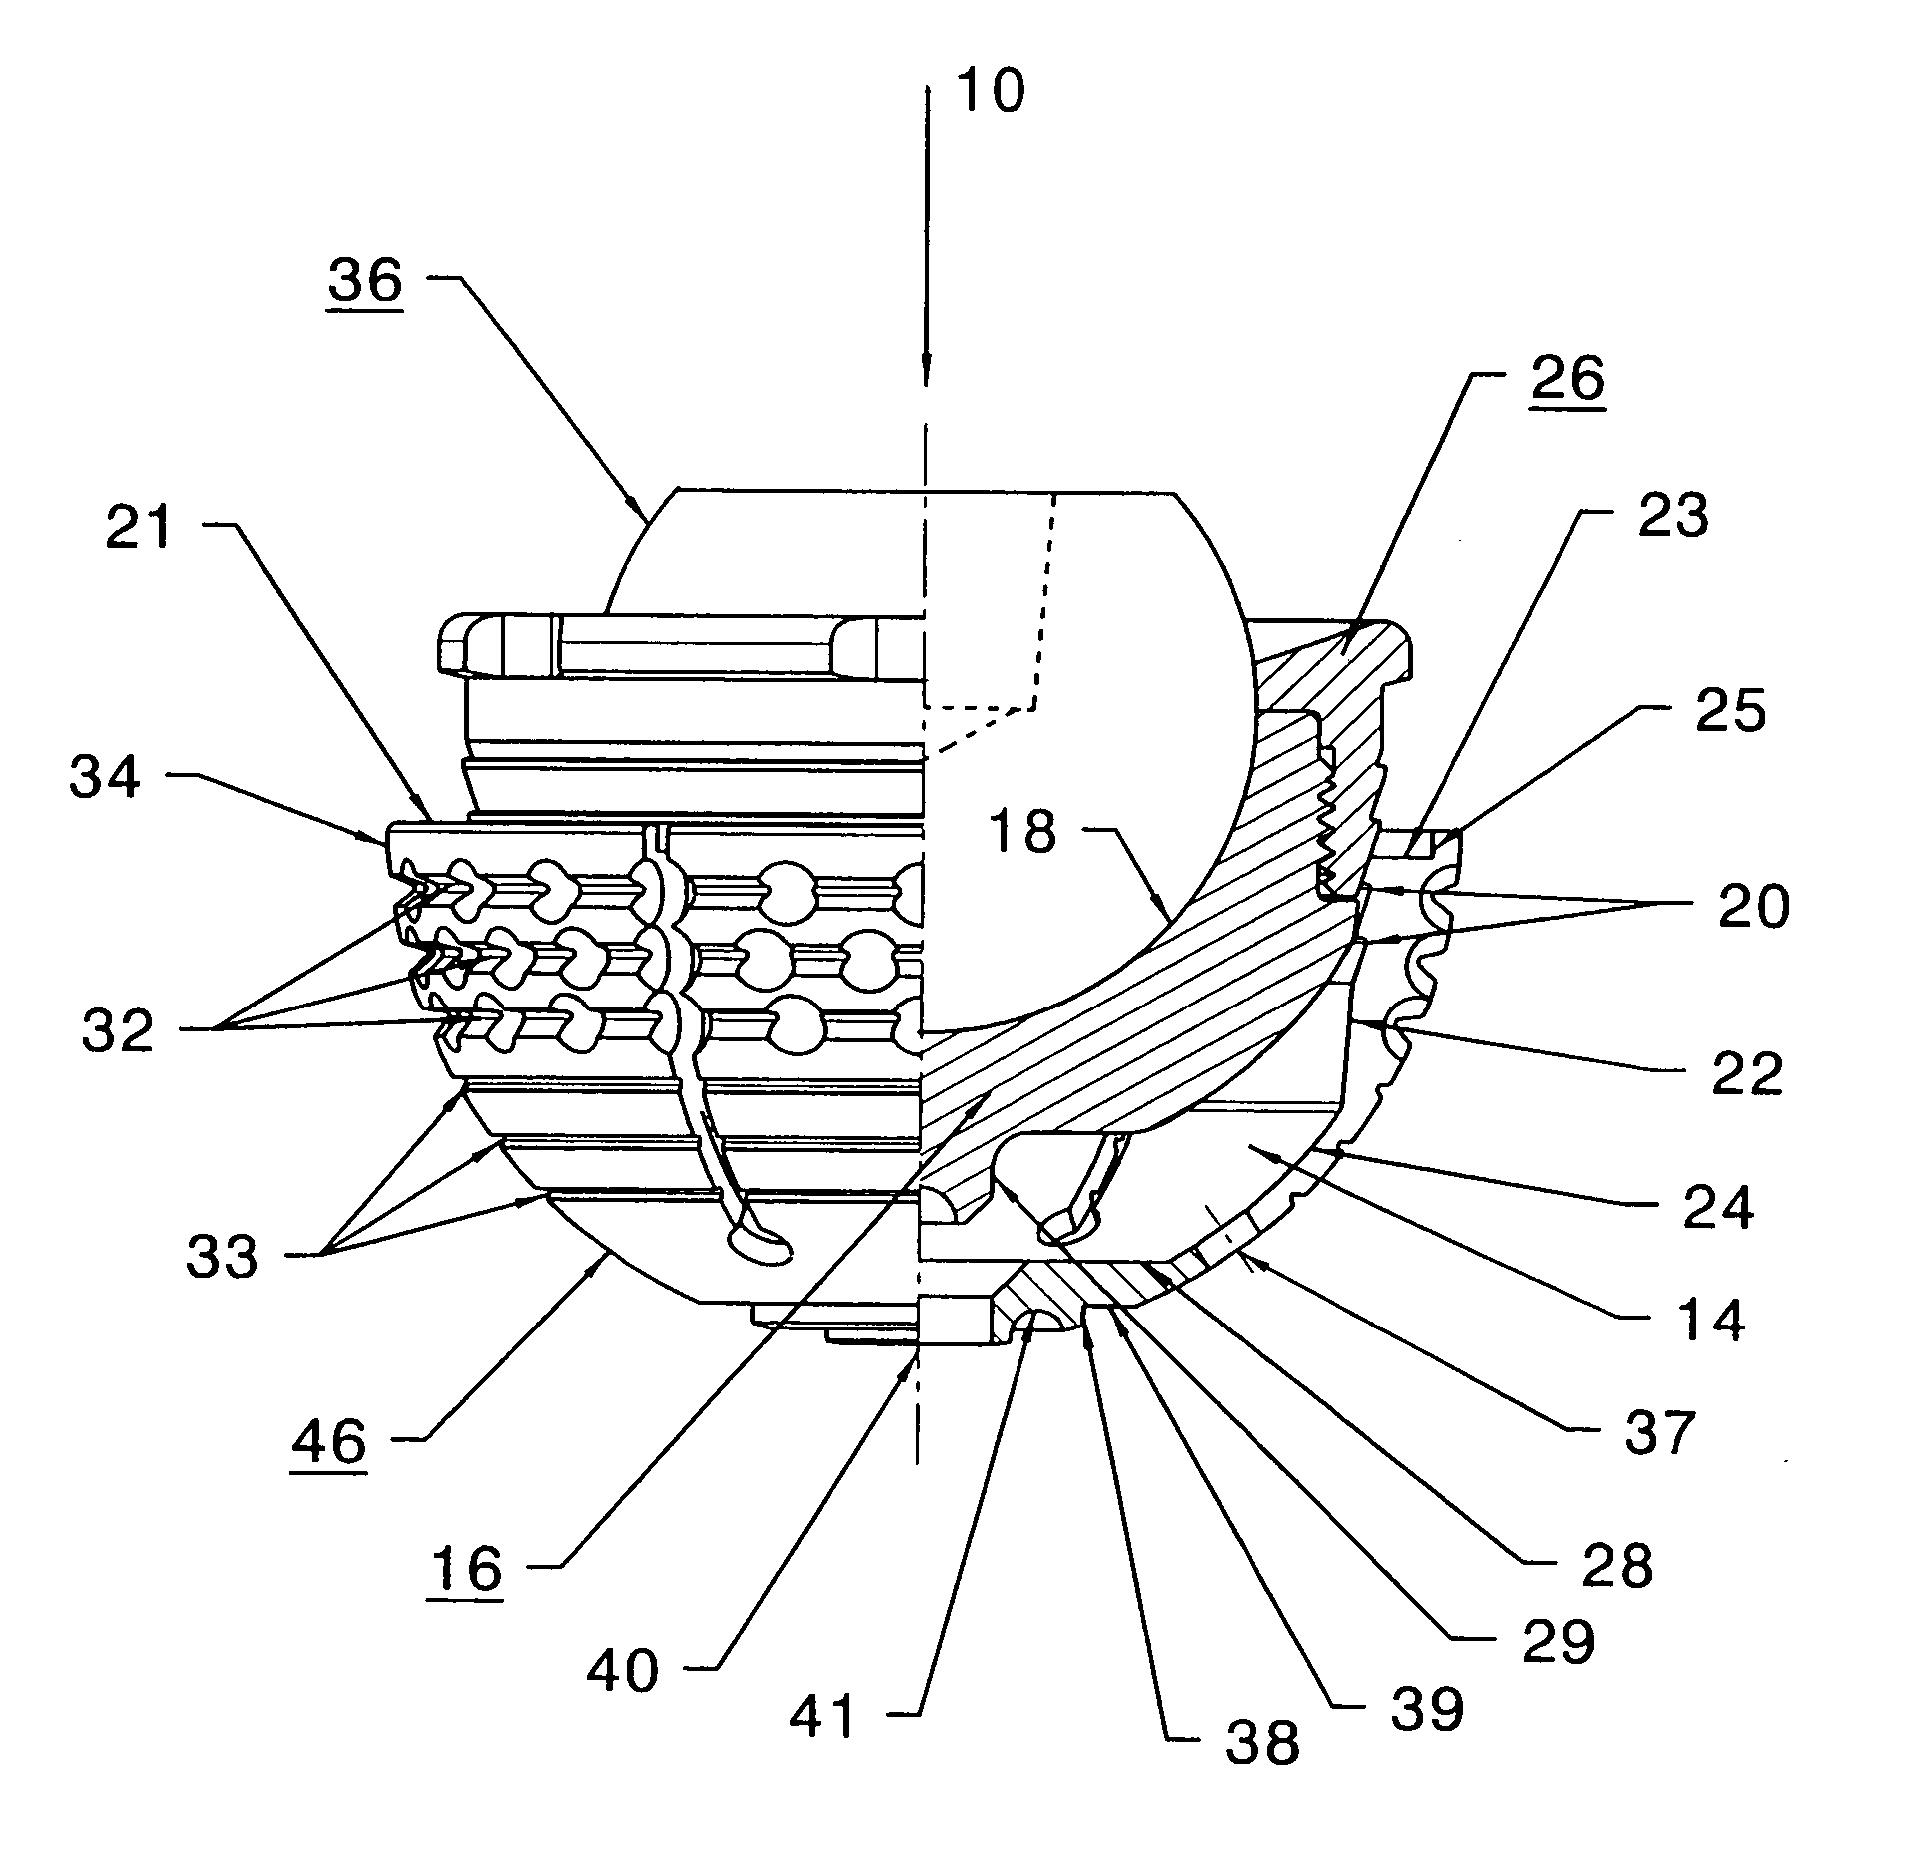 Expandable, supporting acetabular cup